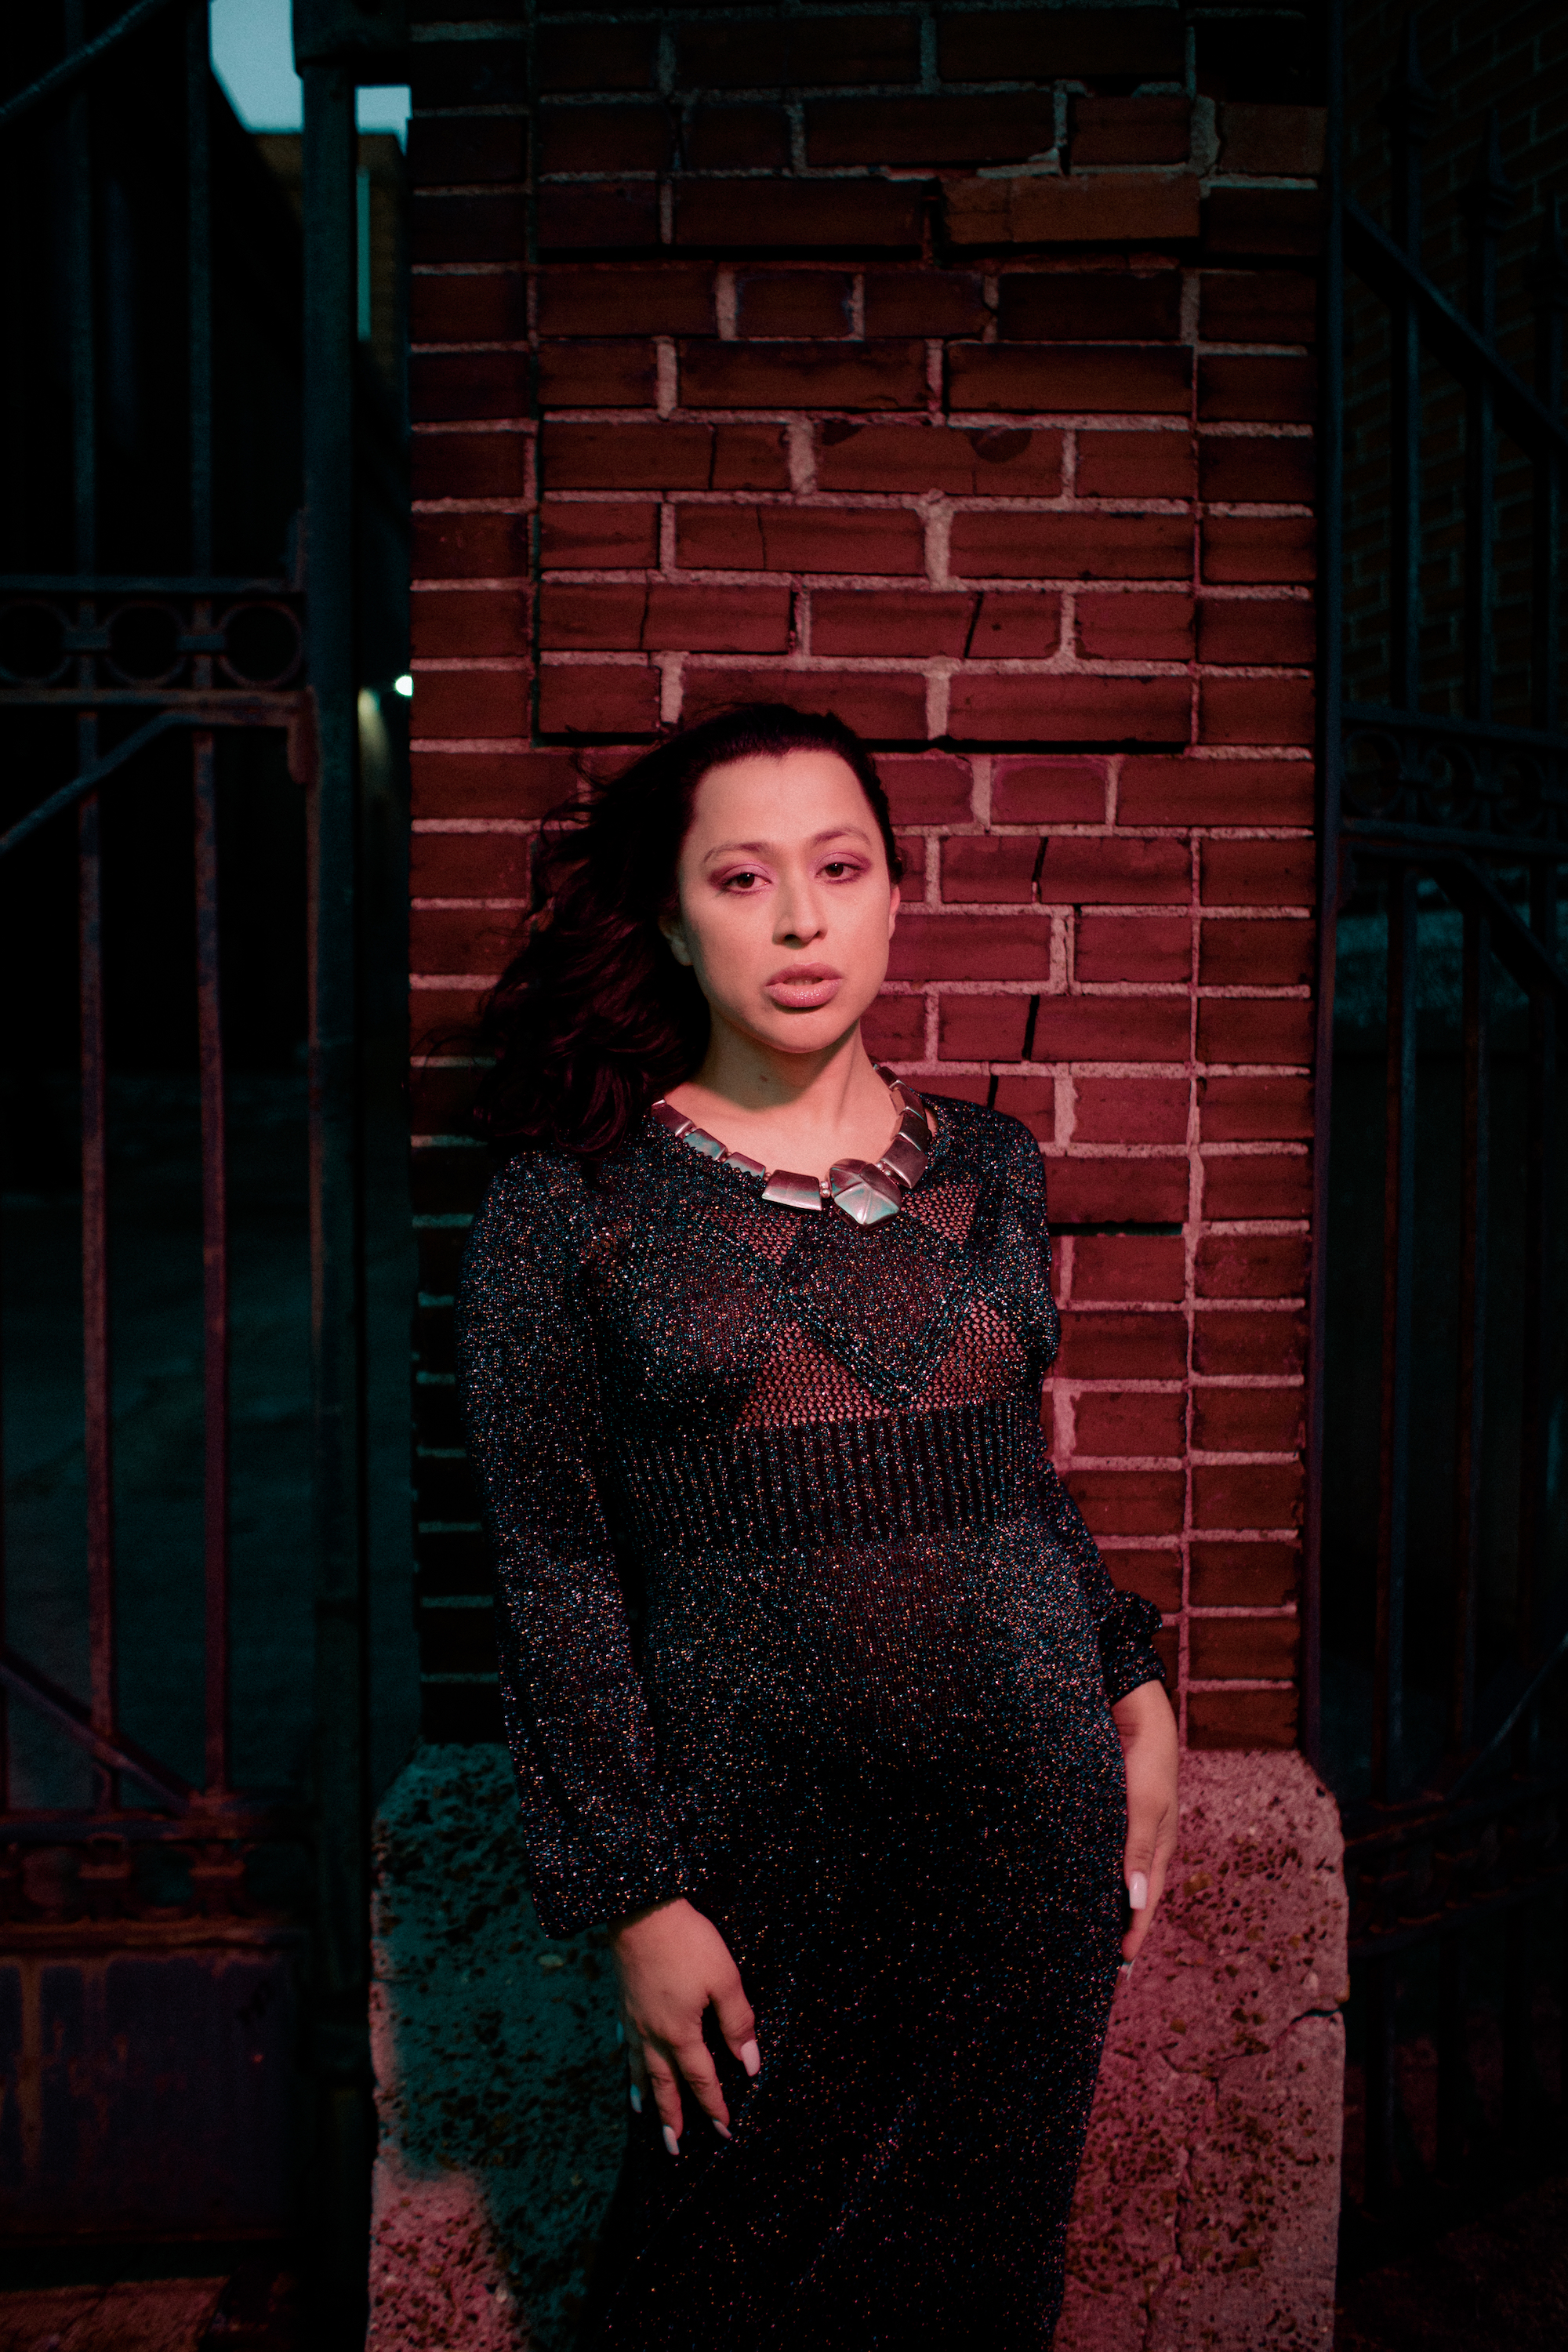 Joss Barton, a light skin latina transsexual woman, stares at the camera. Her hair is black and a few strands are being blown on her face by the wind. She wears a silver round necklace and a dark iridescent knit gown while standing in front of a red brick wall.